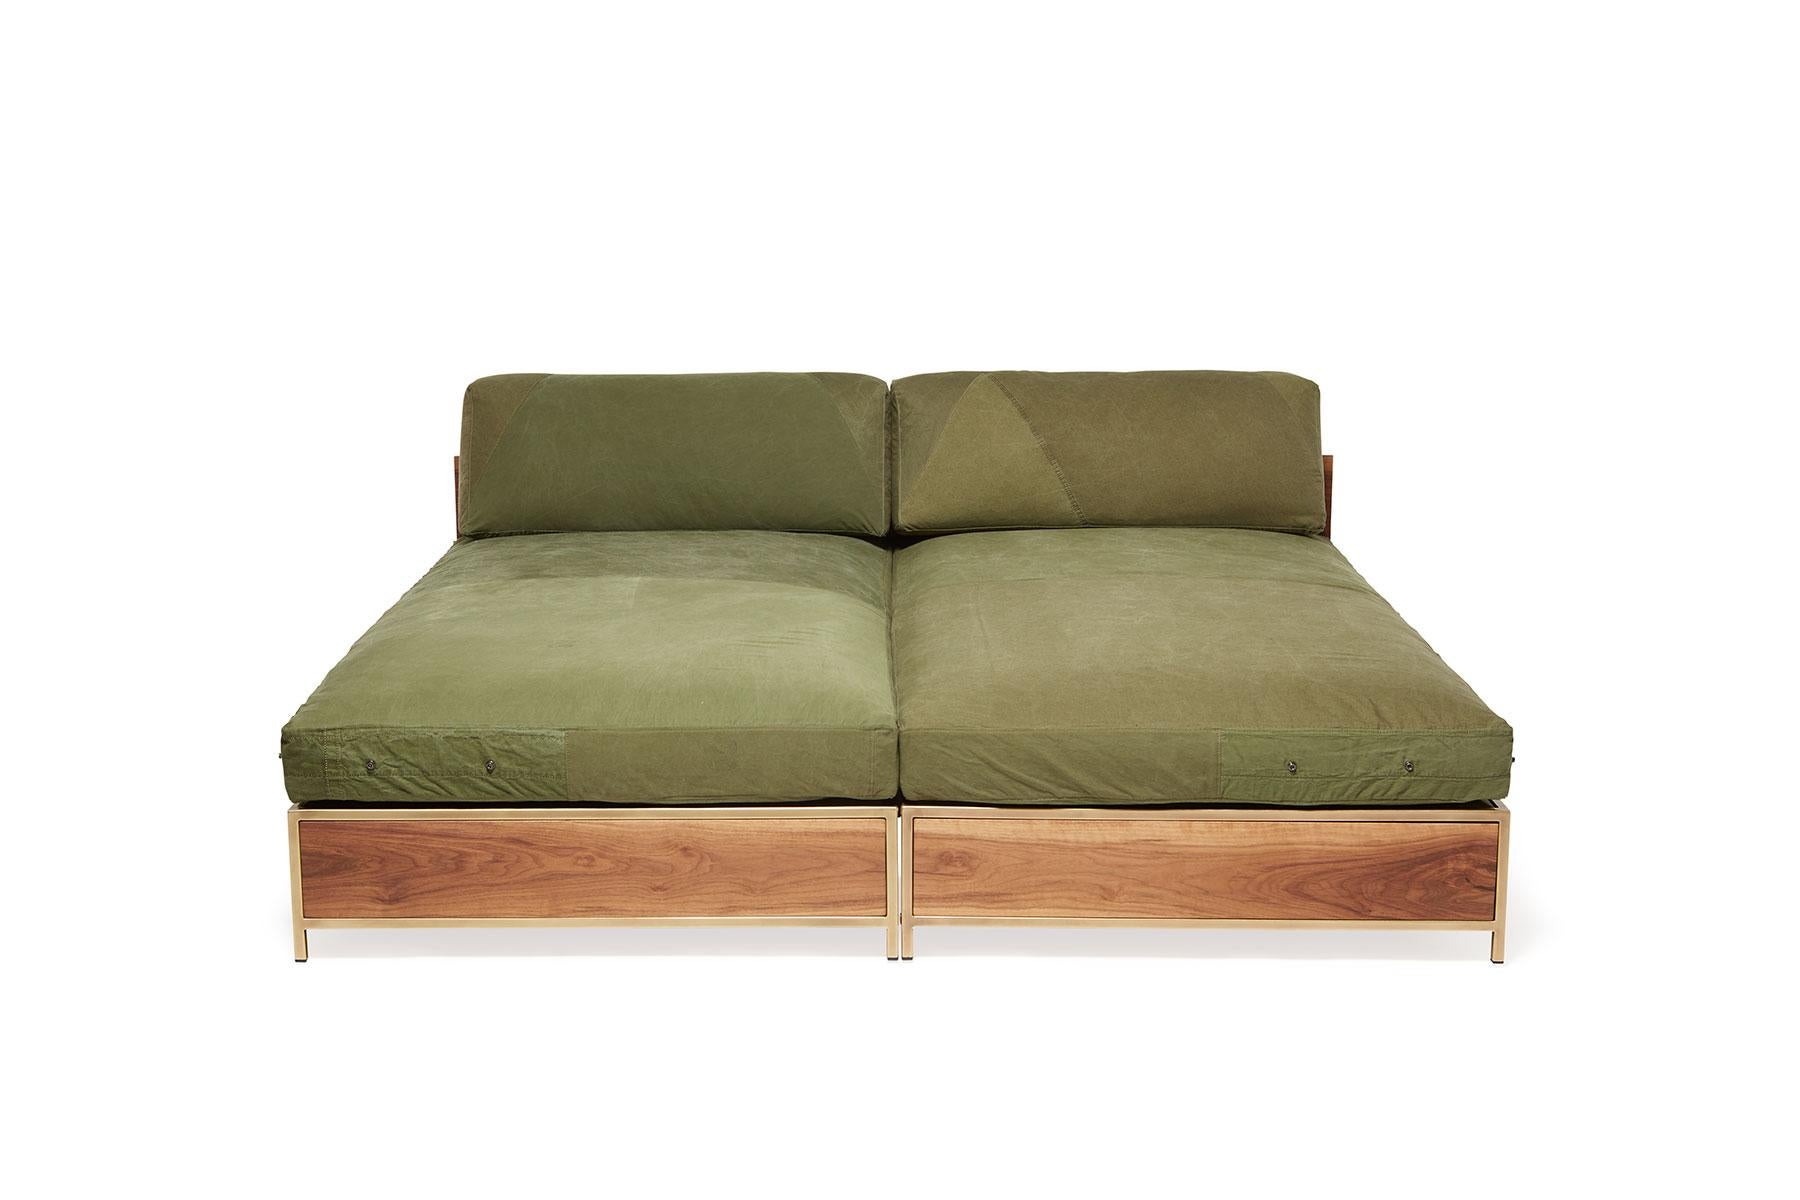 American Vintage Military Canvas Guest Bed Sofa with Storage Drawers For Sale